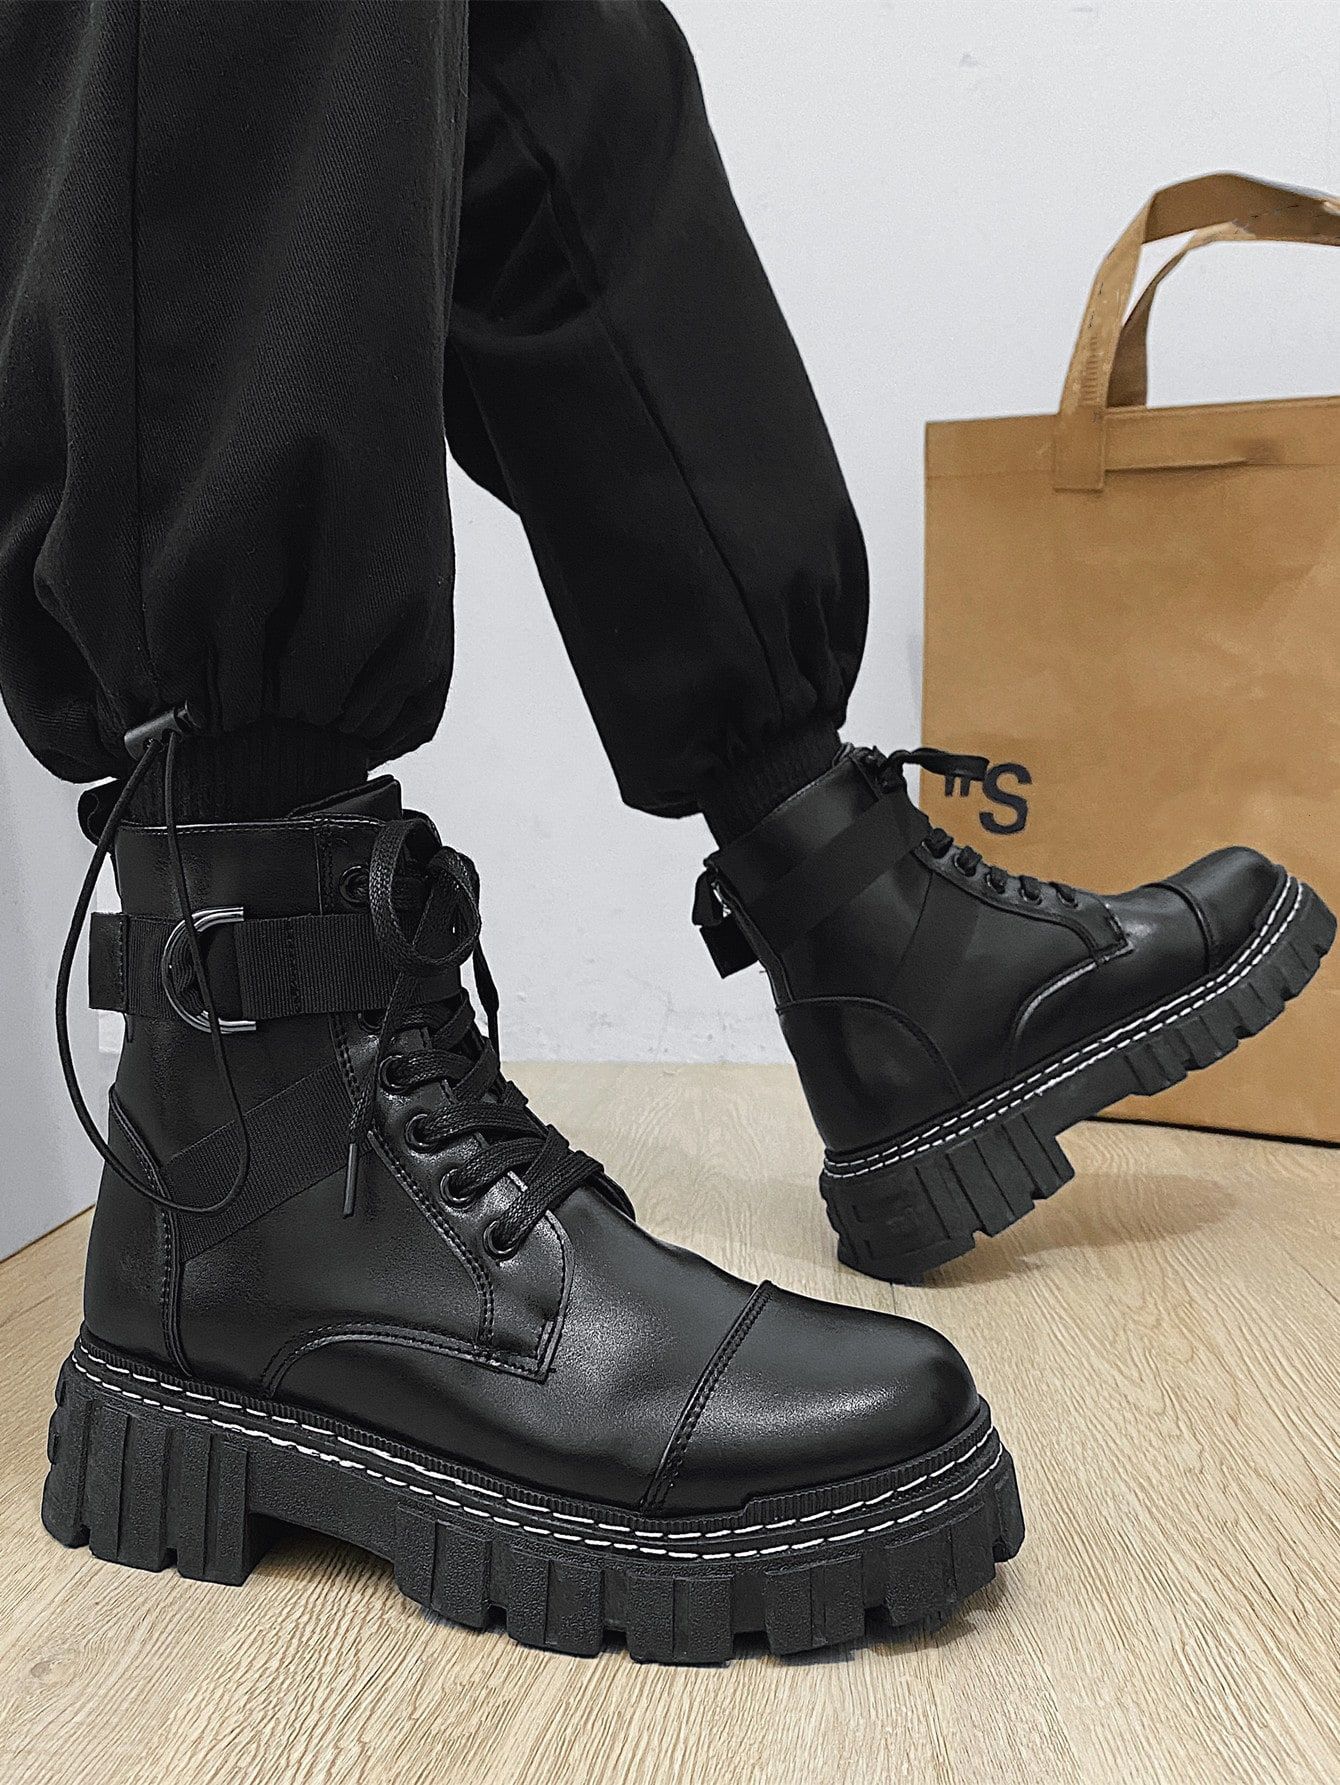 Wear combat boots with various outfits to
look trendy